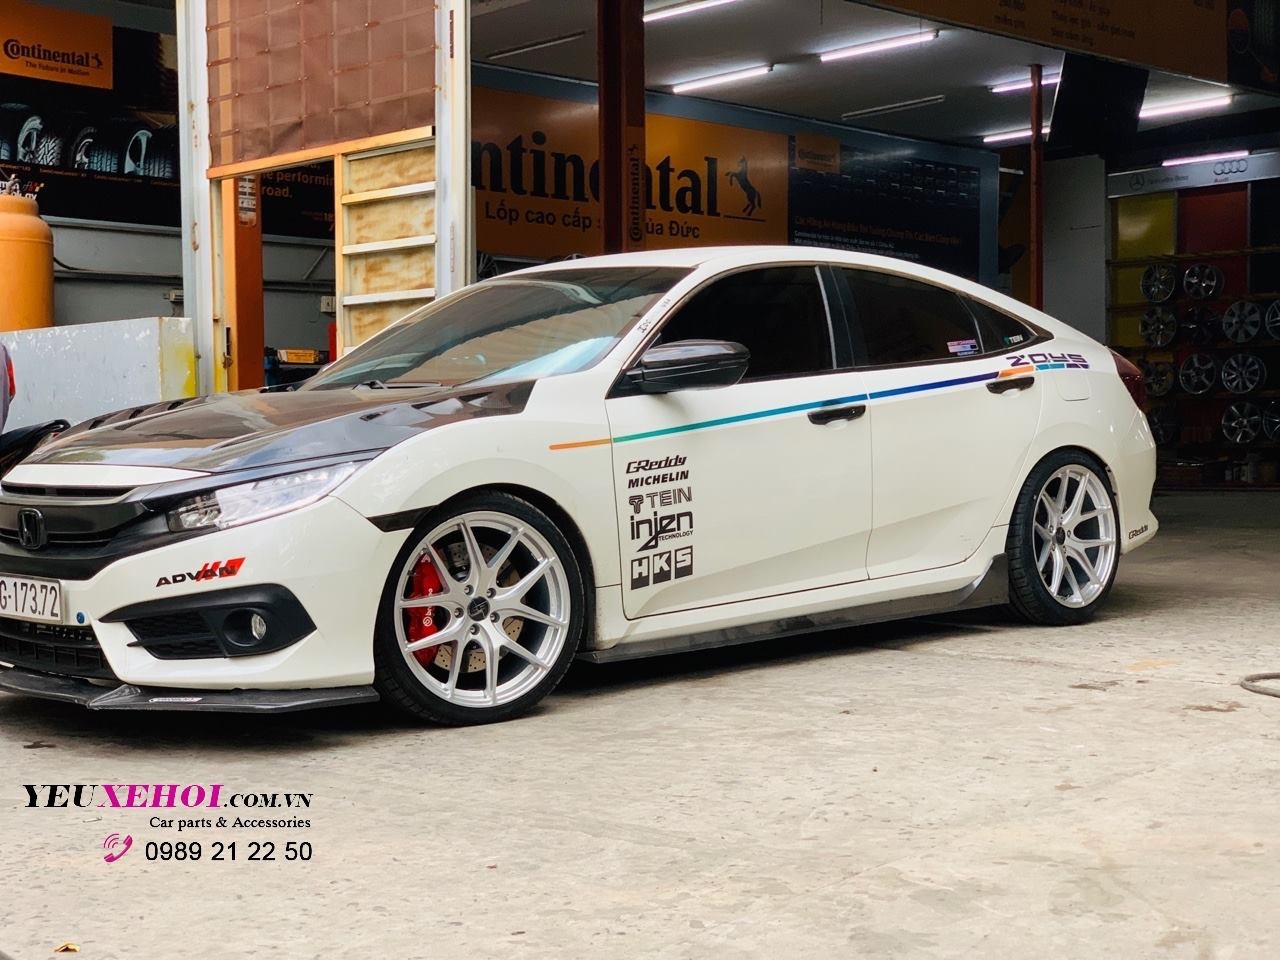 HONDA CIVIC - USA 305FORGED WHEEL 19 INCHES FT01